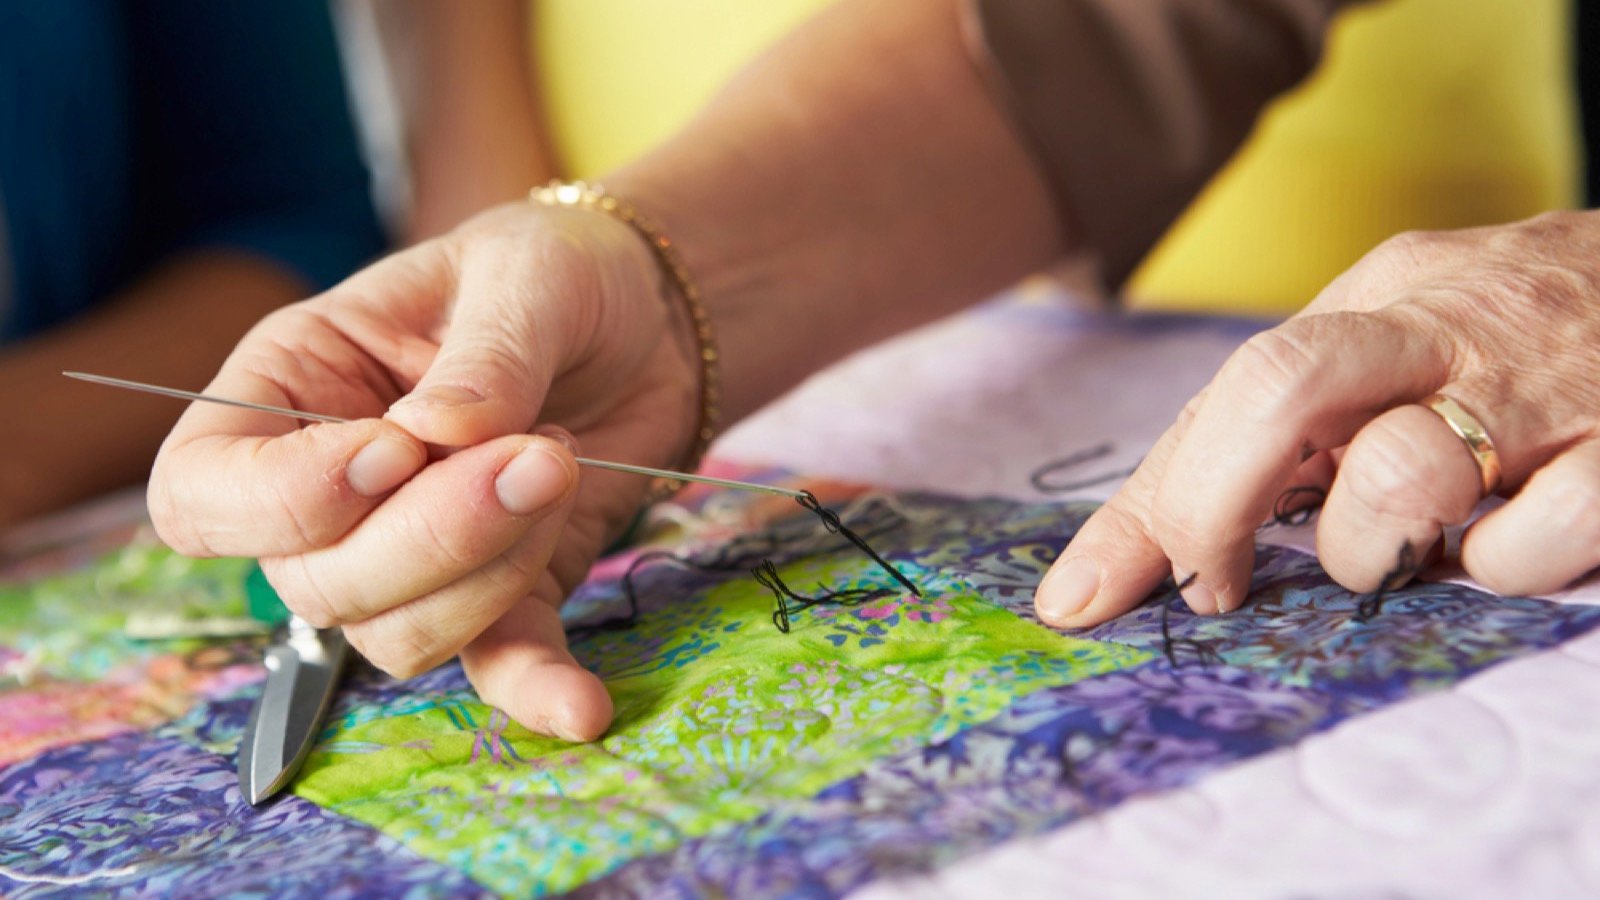 <p>Quilting has a long history in the United States, dating back hundreds of years. It’s less popular today, but many families like to keep the tradition alive. Finding time is an issue, so why not use any break you take while looking after your mental health?</p><p>Using up scraps of material is a worthwhile process in itself. In this wasteful age, we’re all looking to recycle, and quilt-making is a great way to be creative and help the environment while you’re at it.</p>